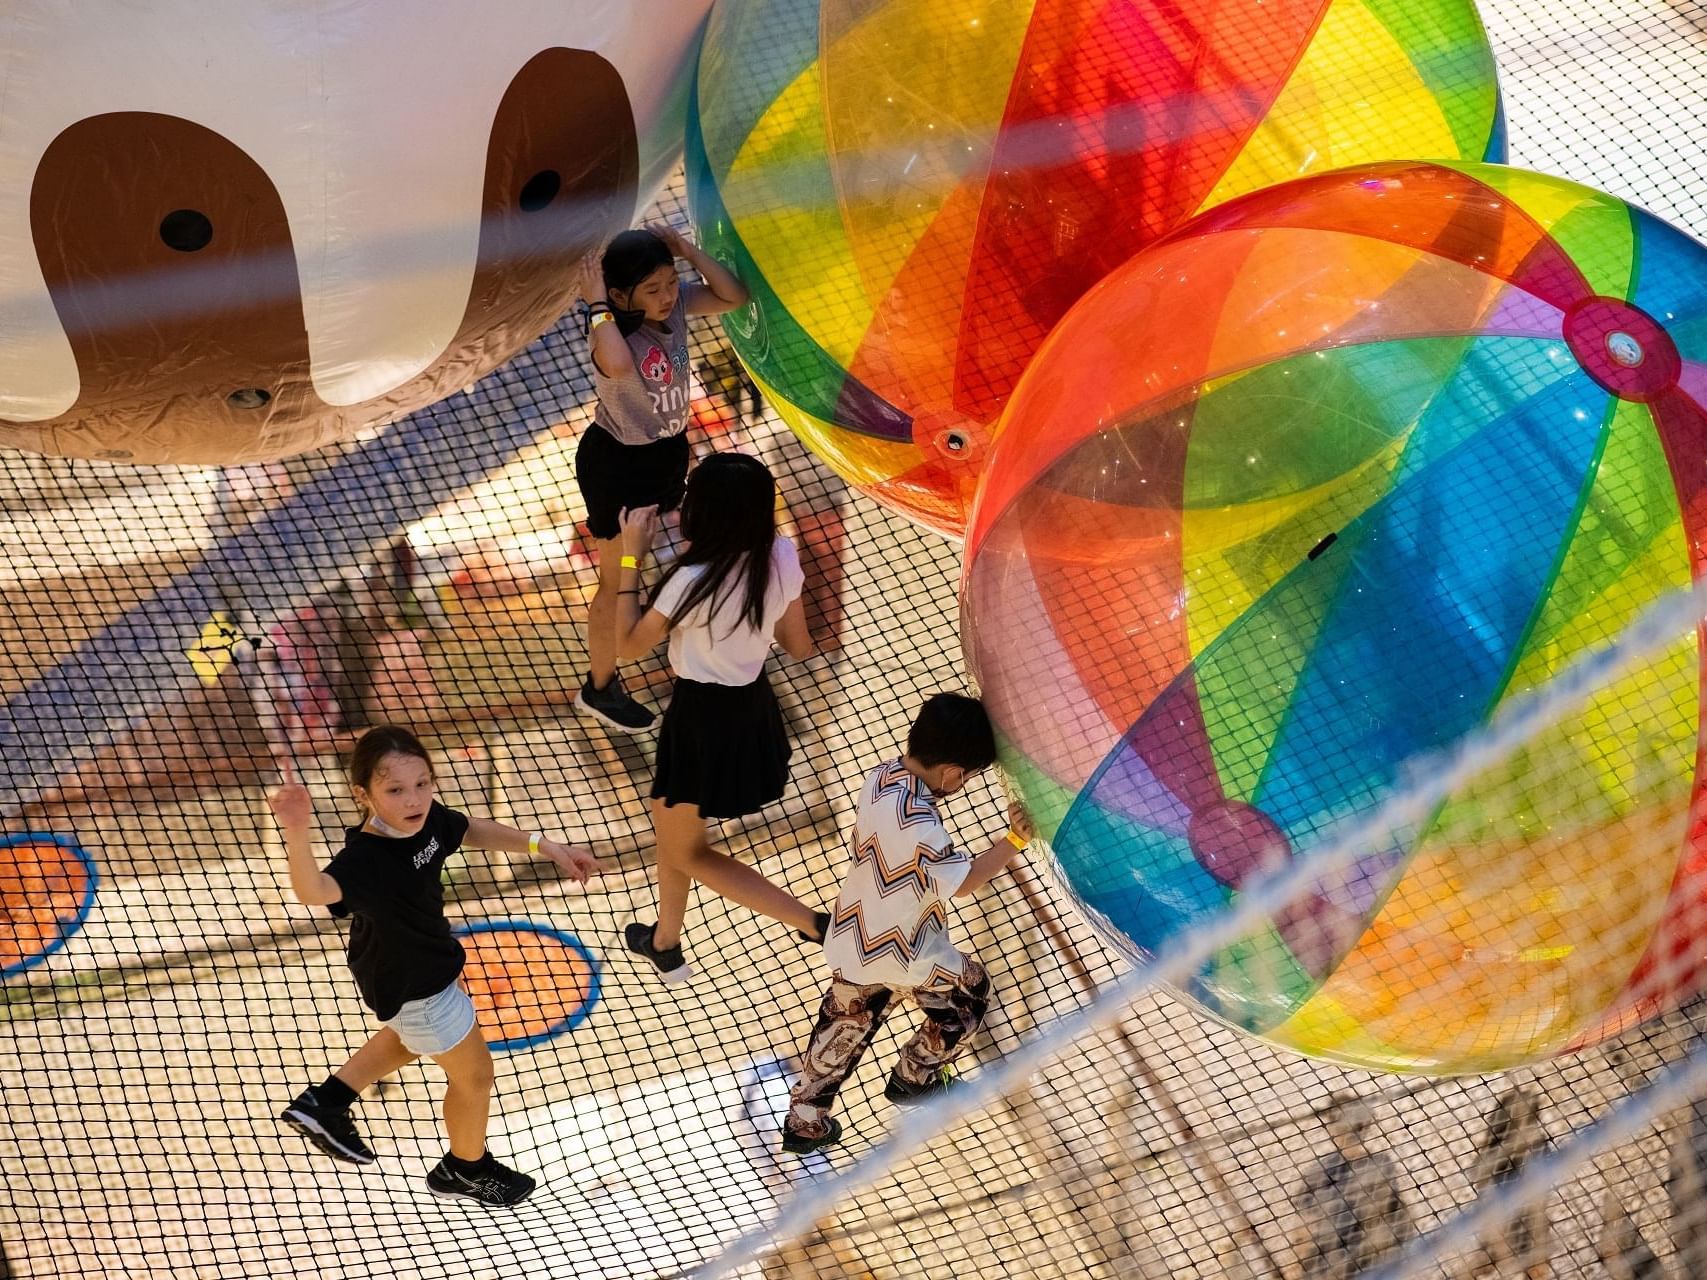 Children playing with inflatable Balls at One Farrer Hotel